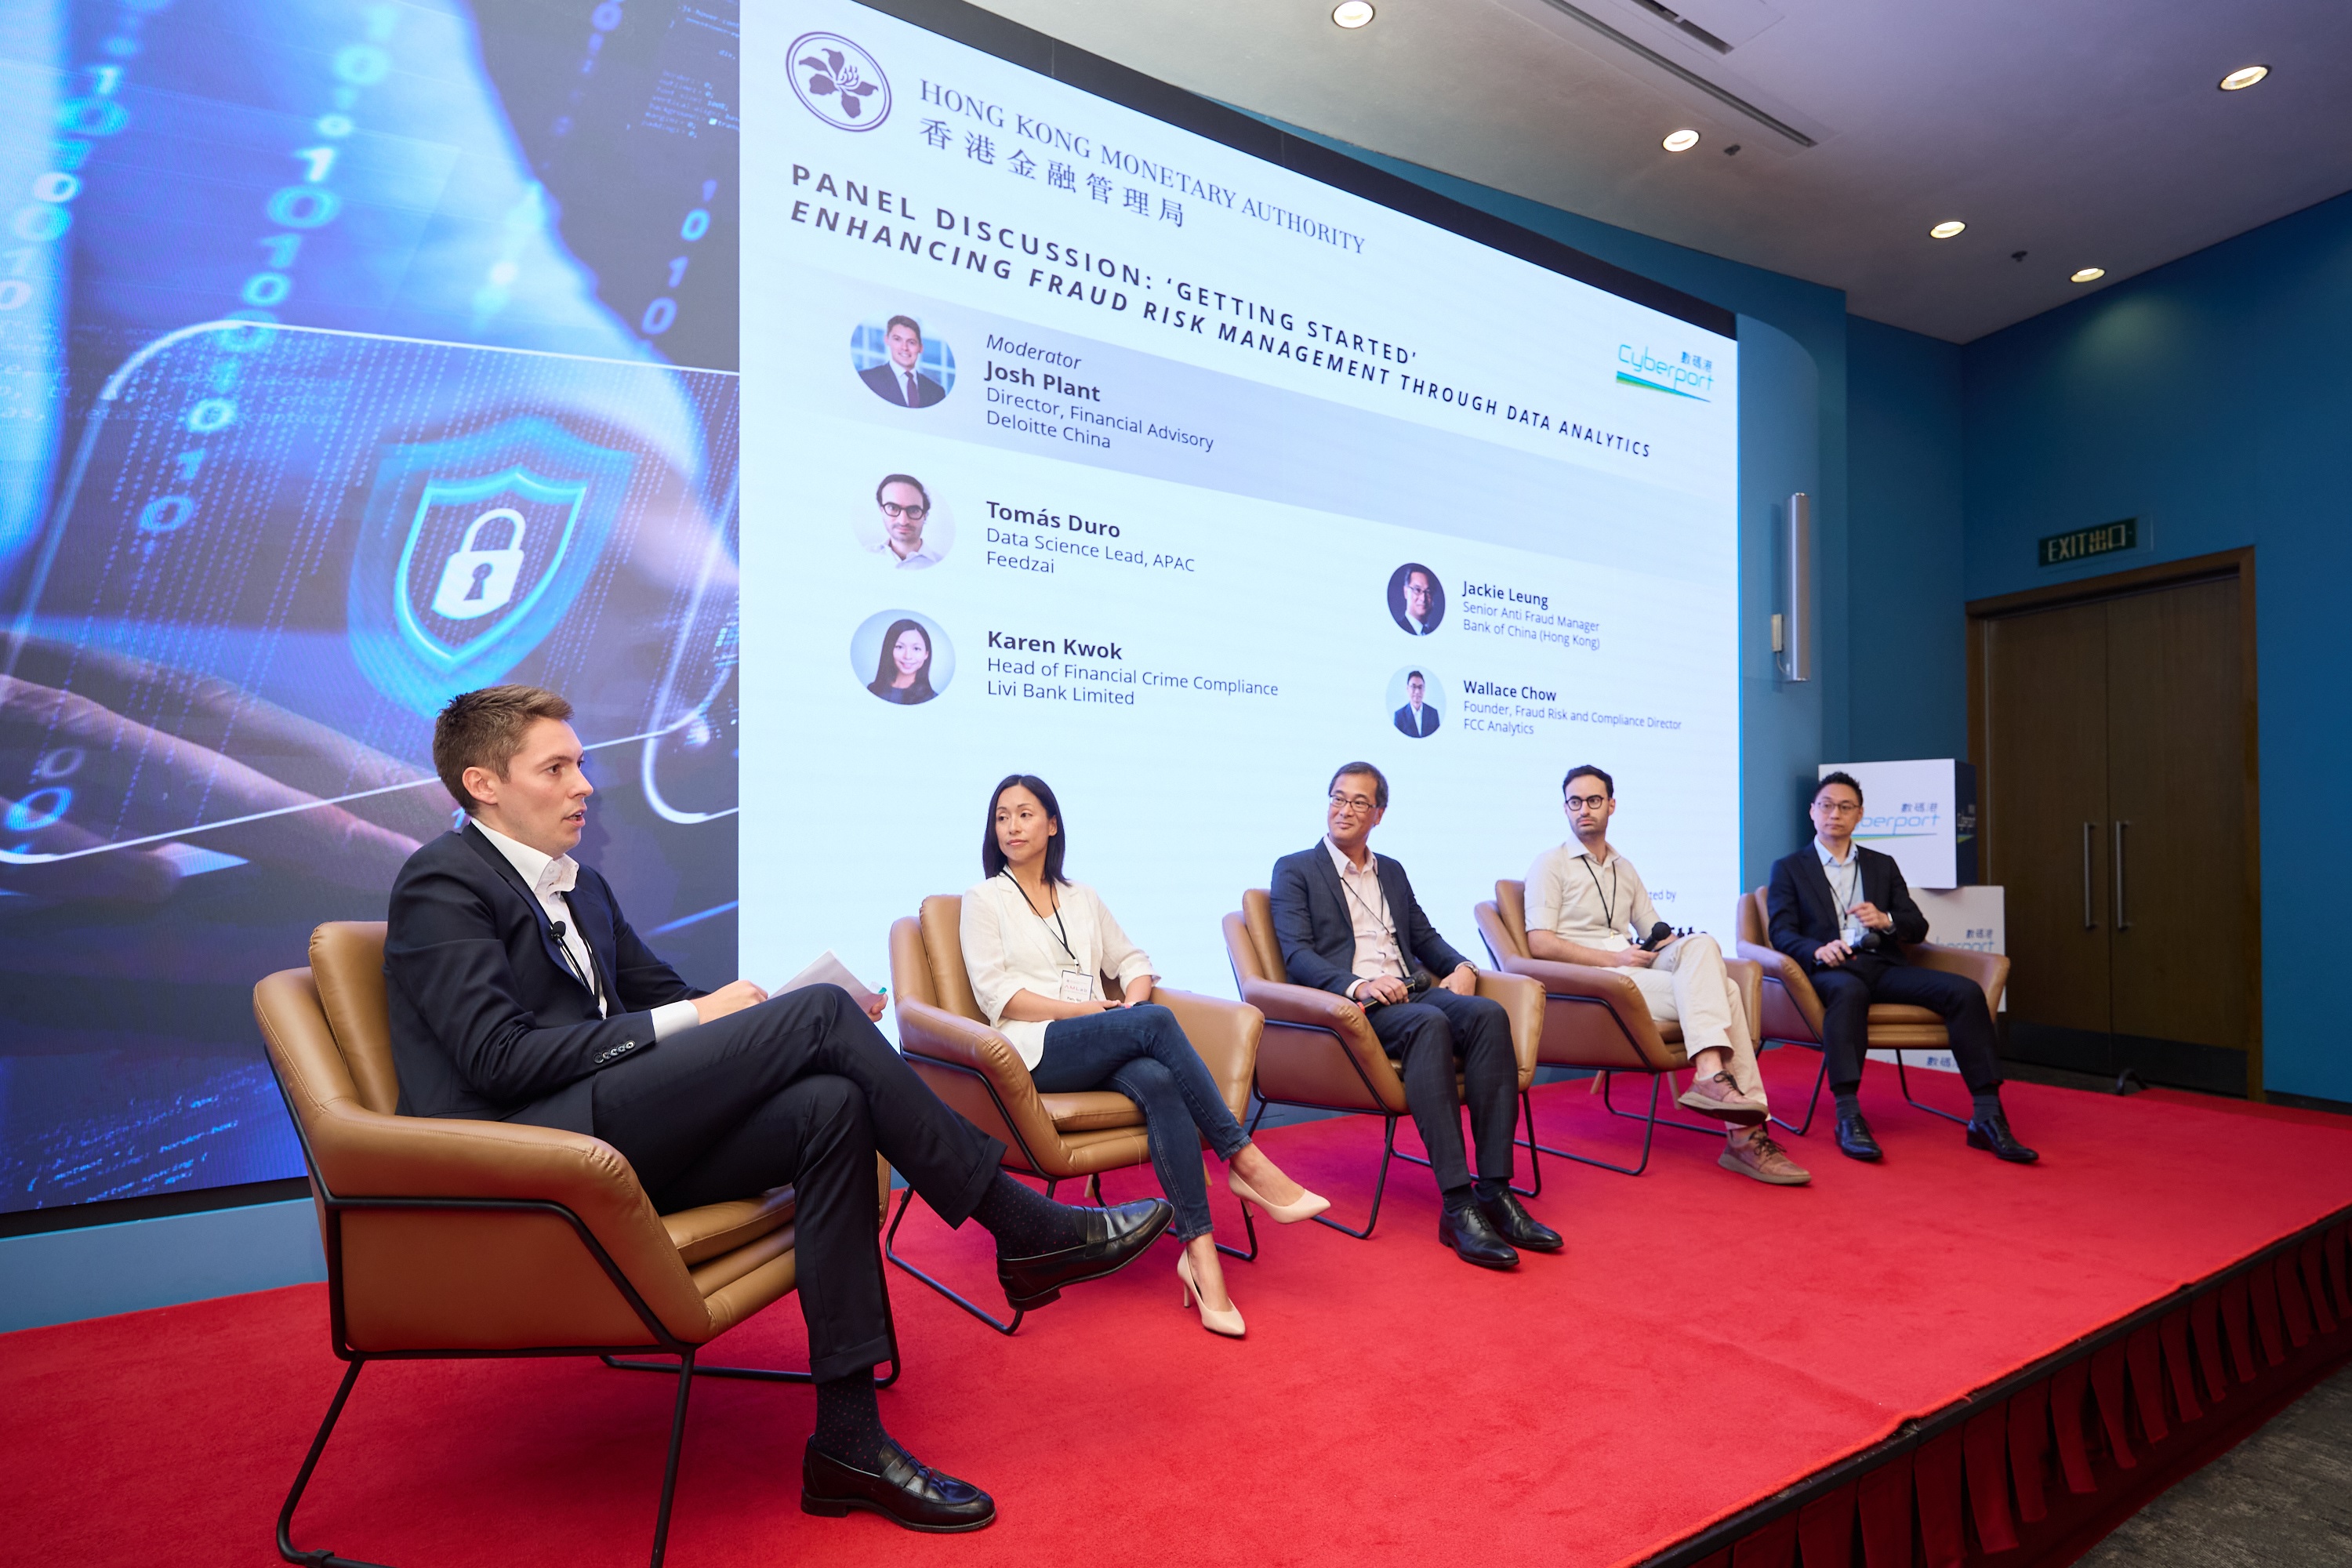 Senior representatives from Deloitte, banks and technology firms share views in a panel discussion on how banks can enhance their anti-fraud capabilities.